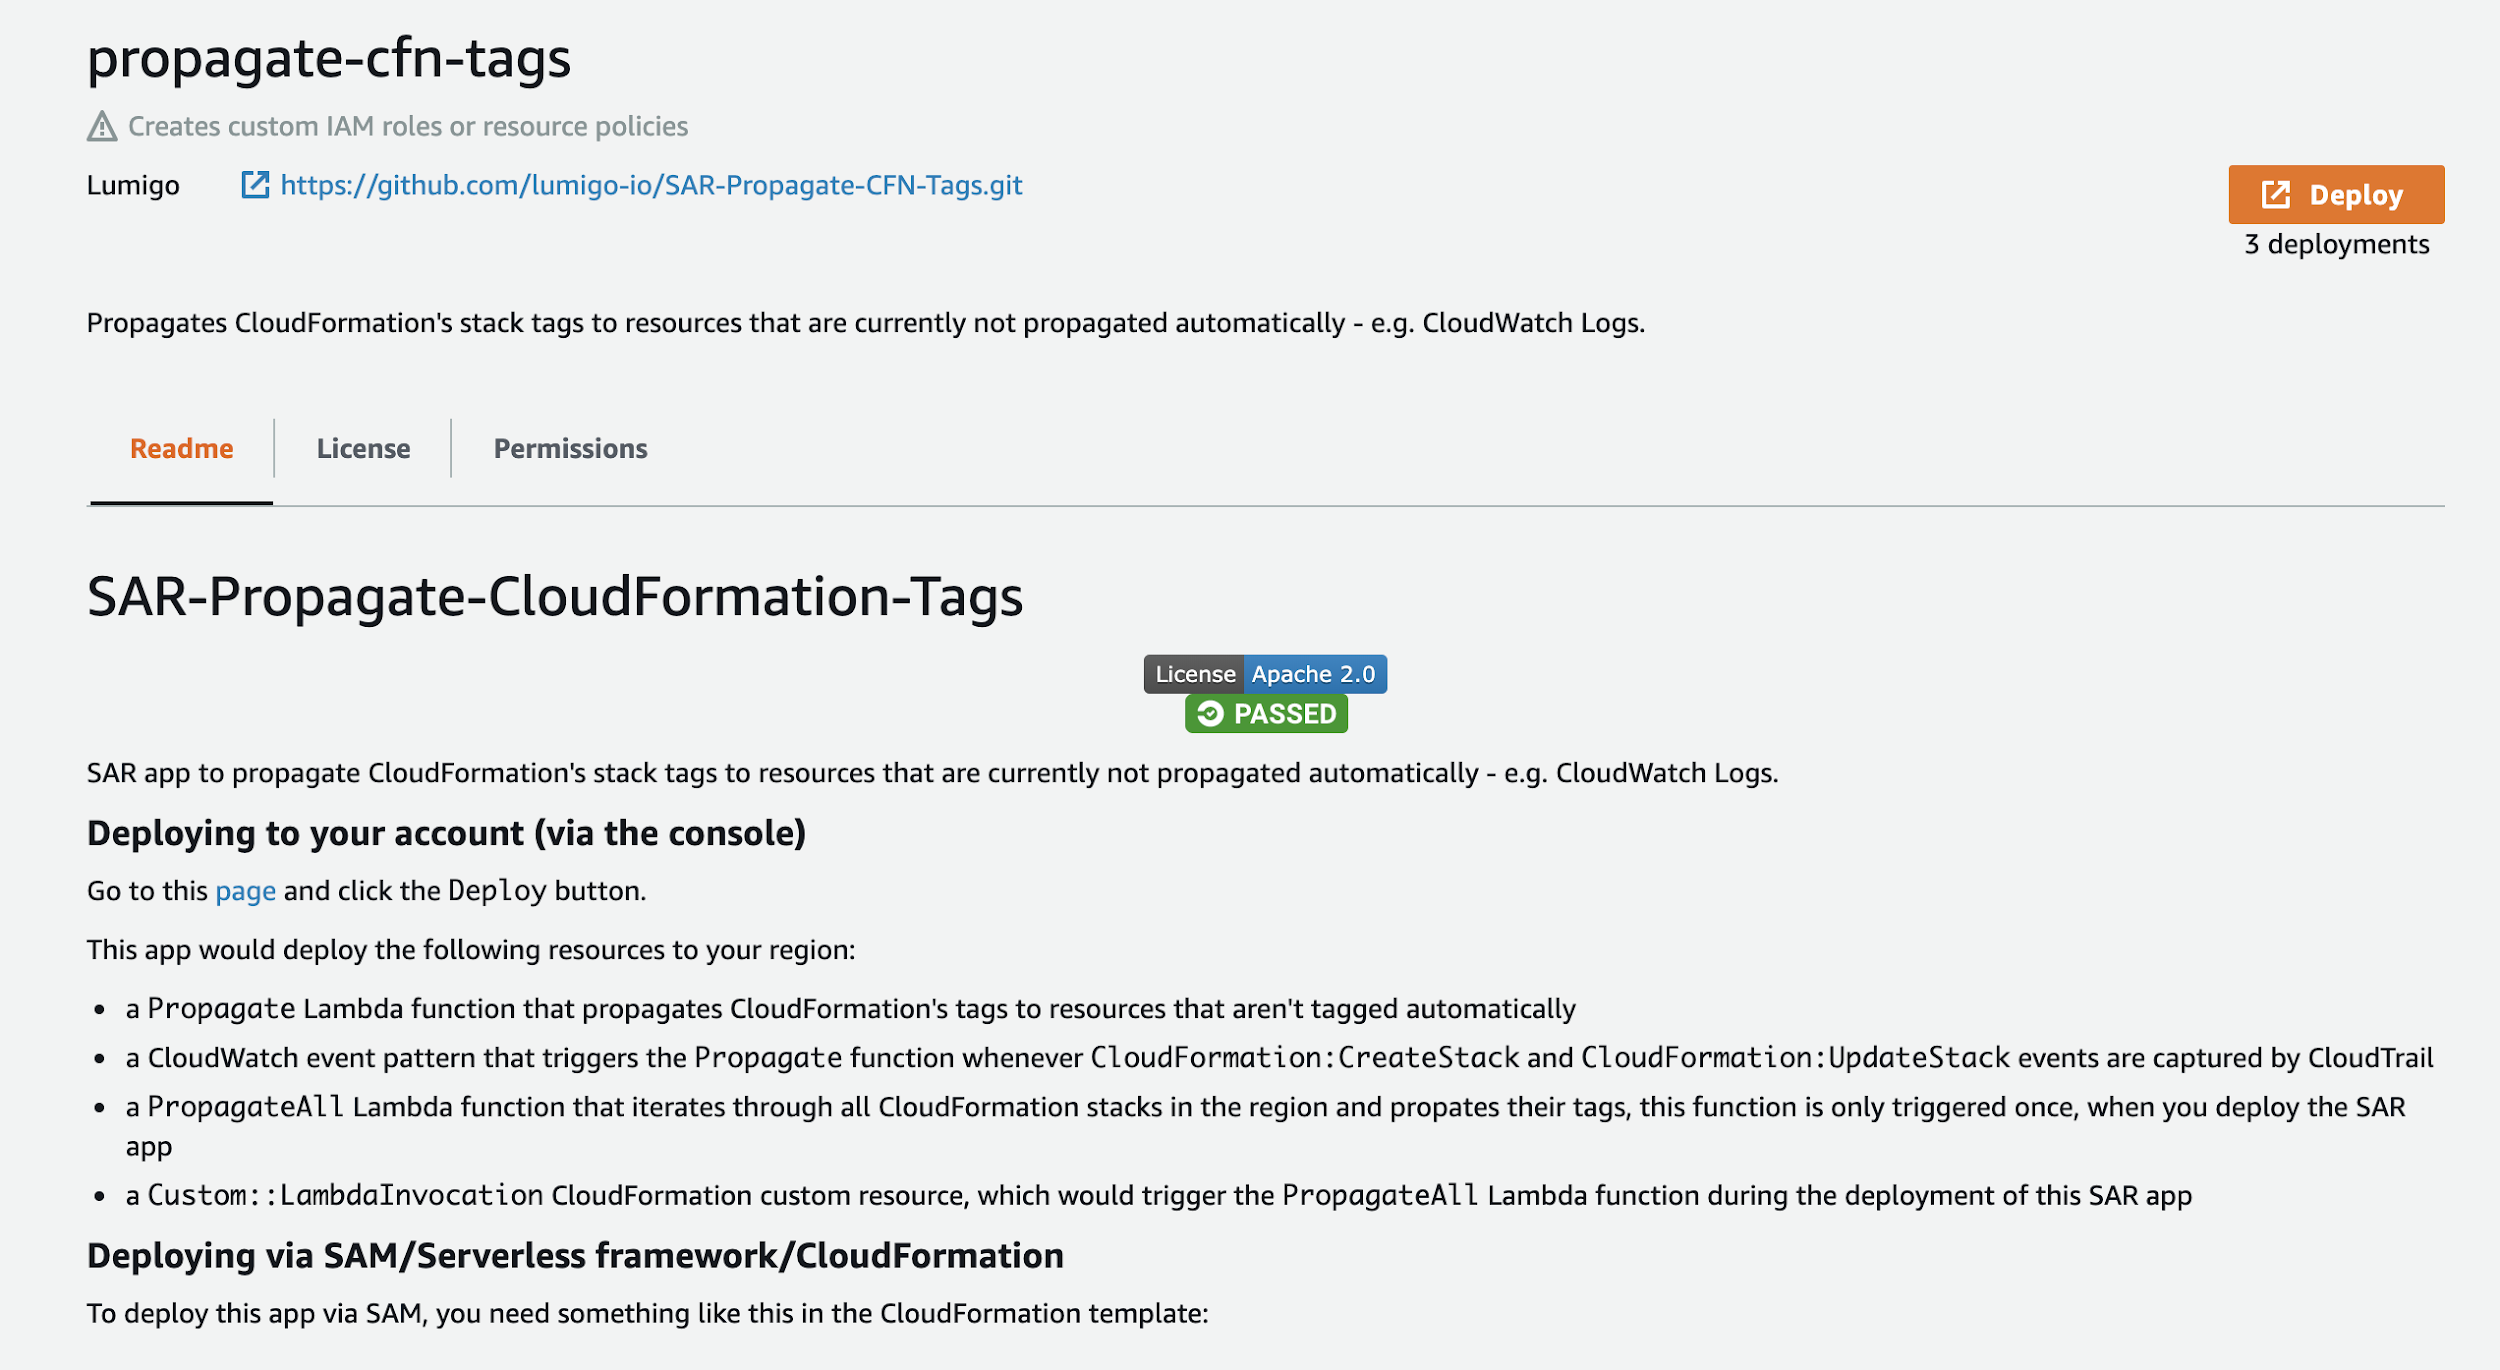 Deploying the CloudFormation Tags SAR manually via the AWS console.